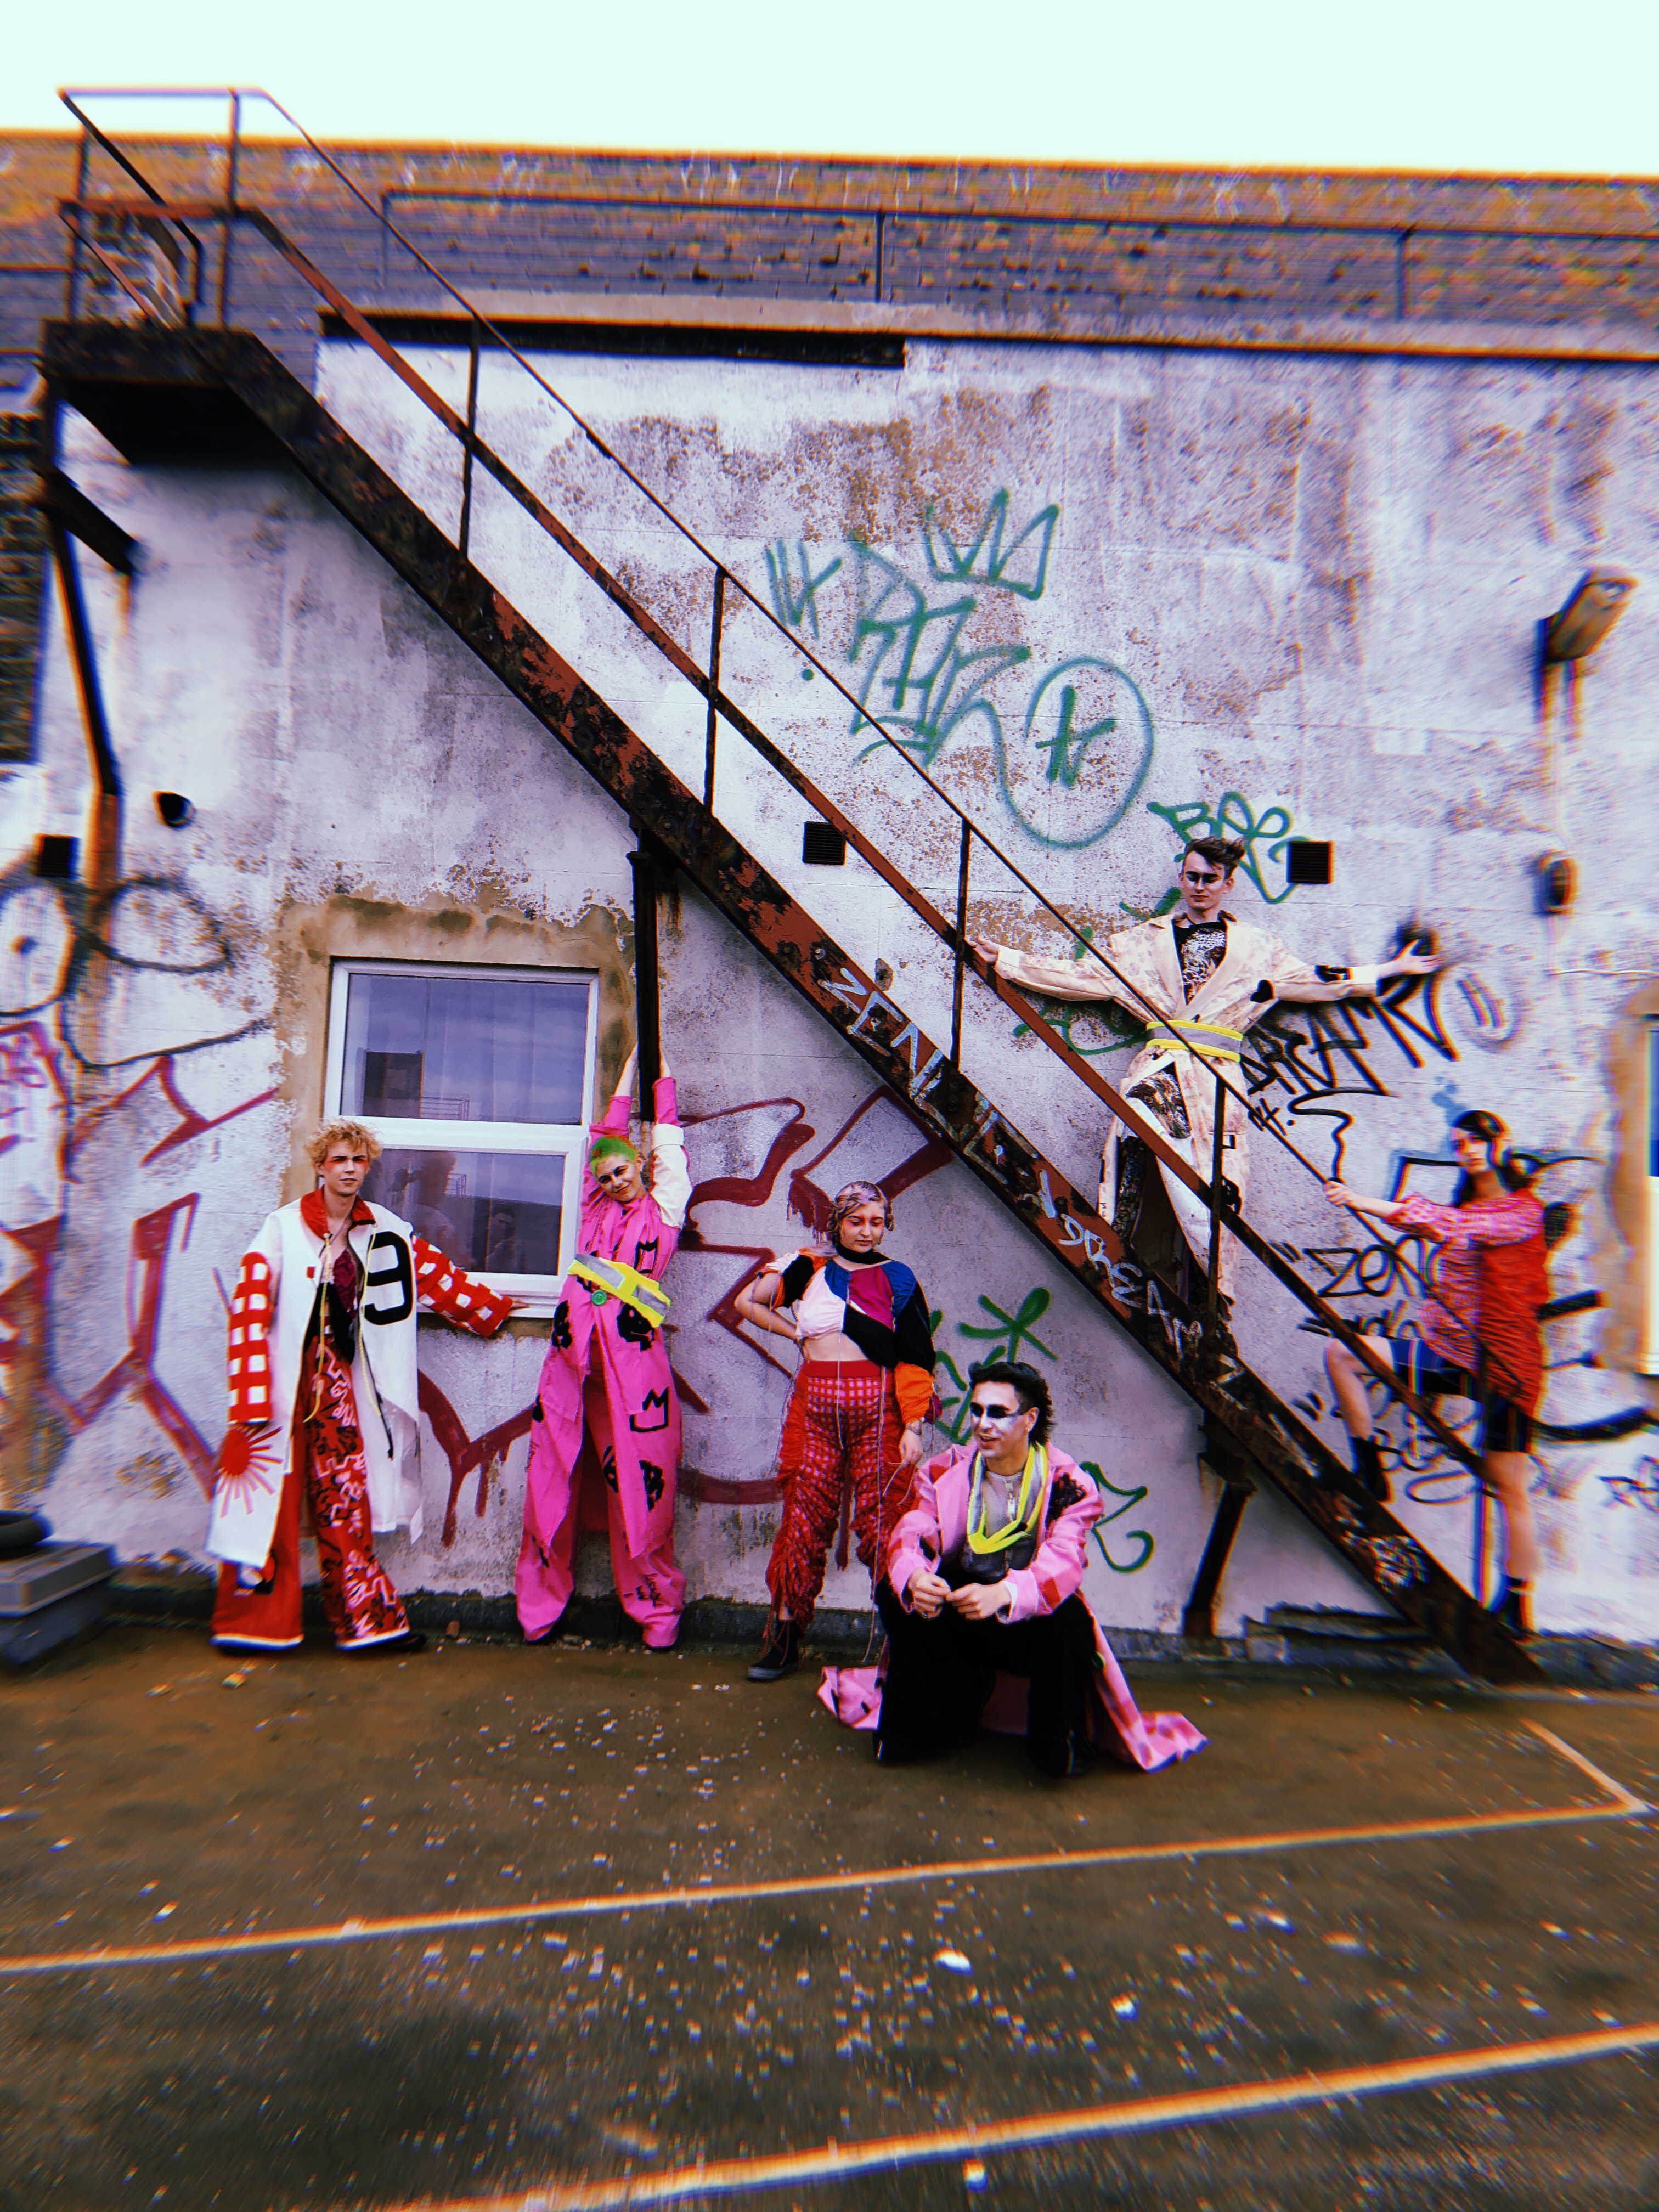 Waste to wear_waste free fashion collective_ margate now festival 2019_image Erin Laurel Hayhow